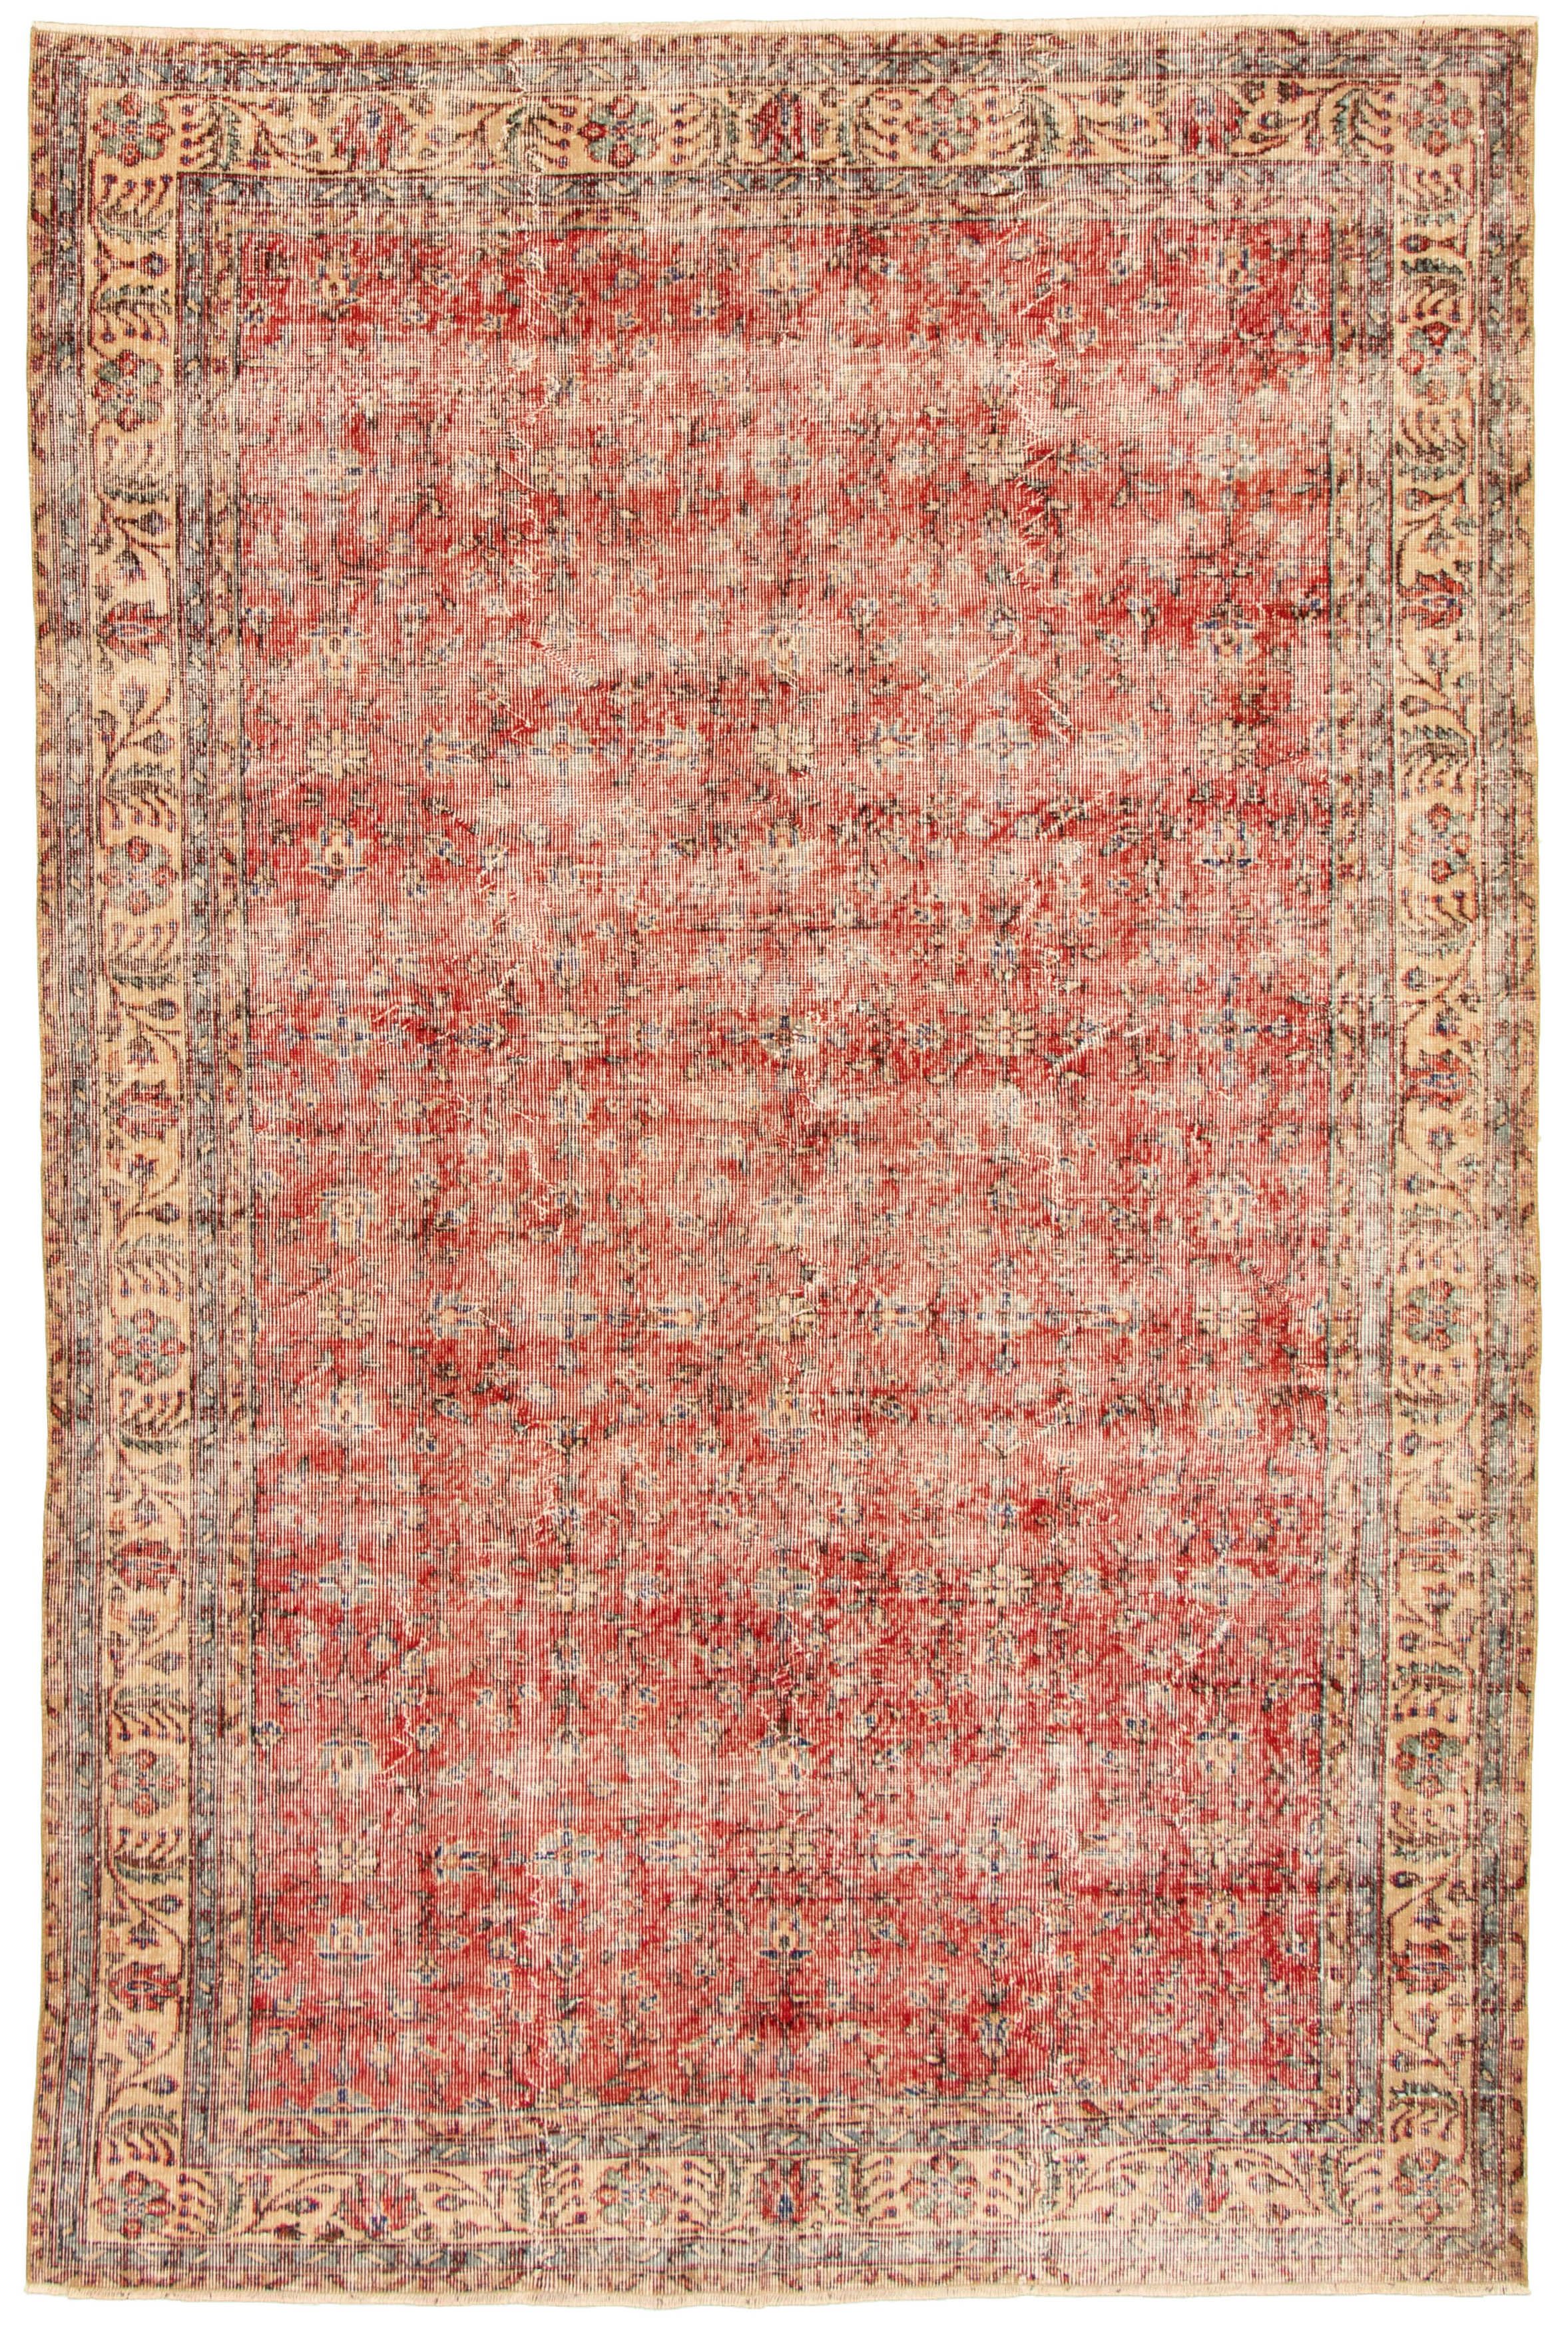 eCarpet Gallery Large Area Rug for Living Room Finest Khal Mohammadi Bordered Red Rug 6'5 x 9'11 Bedroom Hand-Knotted Wool Rug 347985 